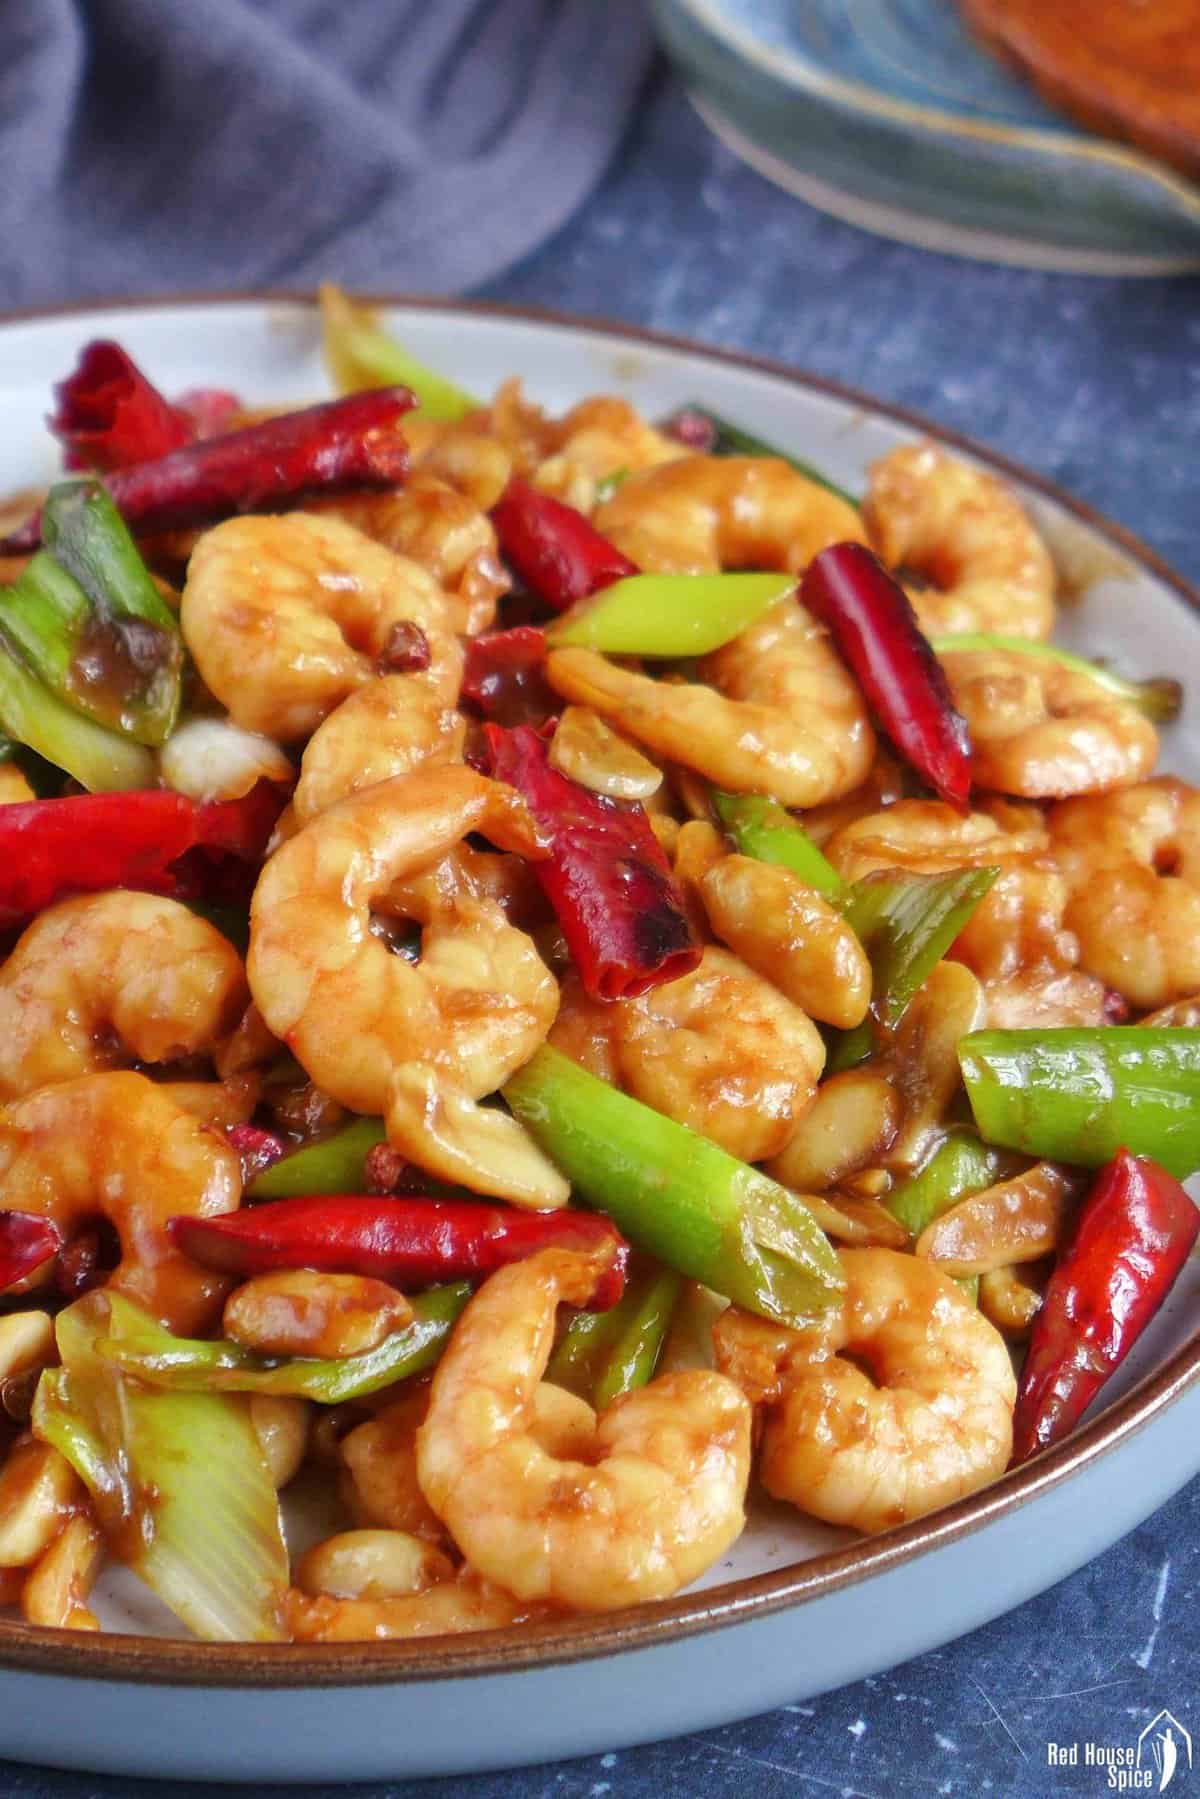 Kung Pao Shrimp in a plate.